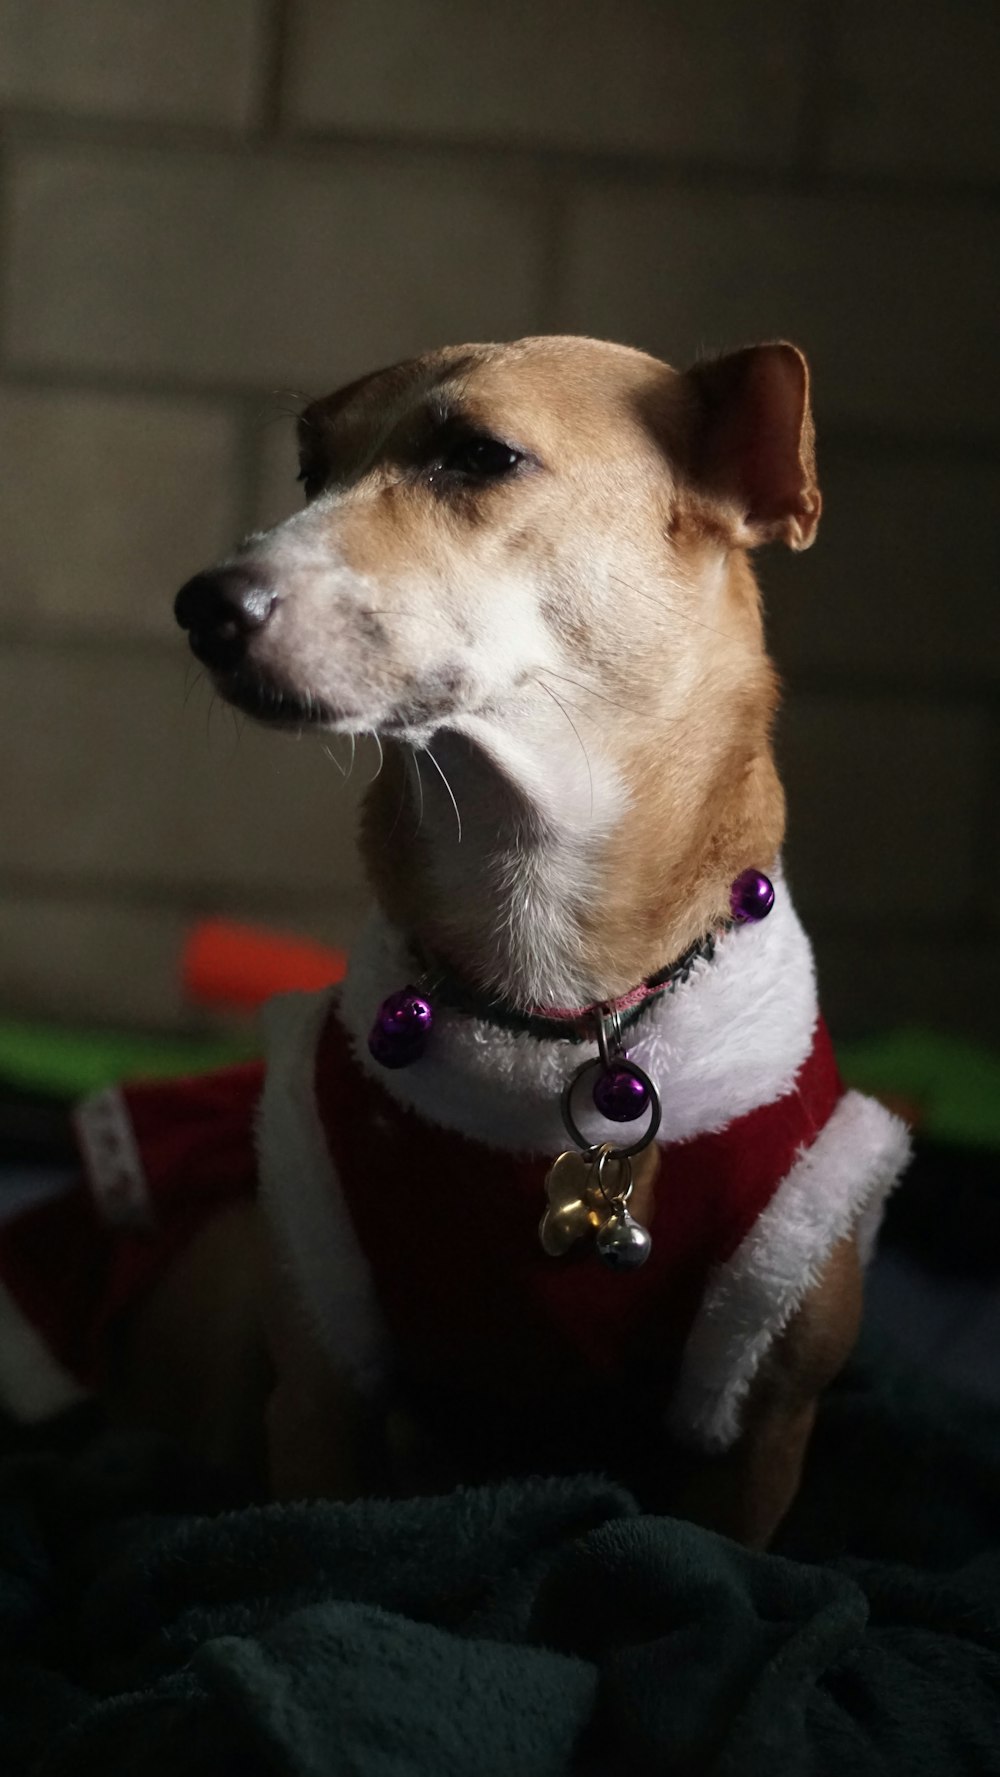 a brown and white dog wearing a red and white sweater